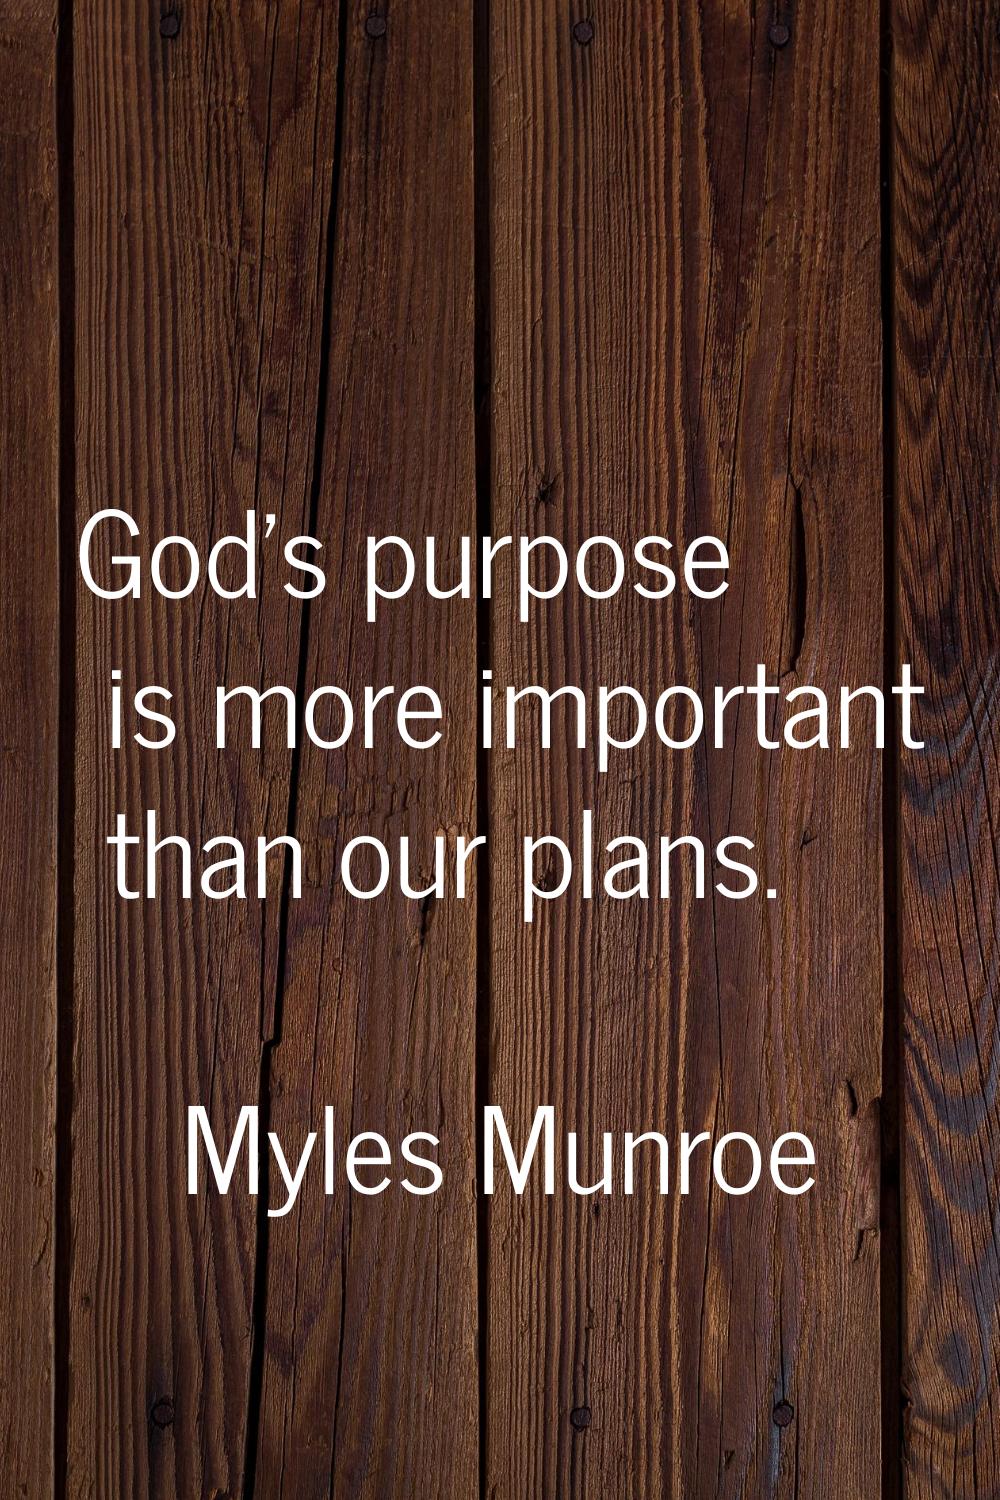 God's purpose is more important than our plans.